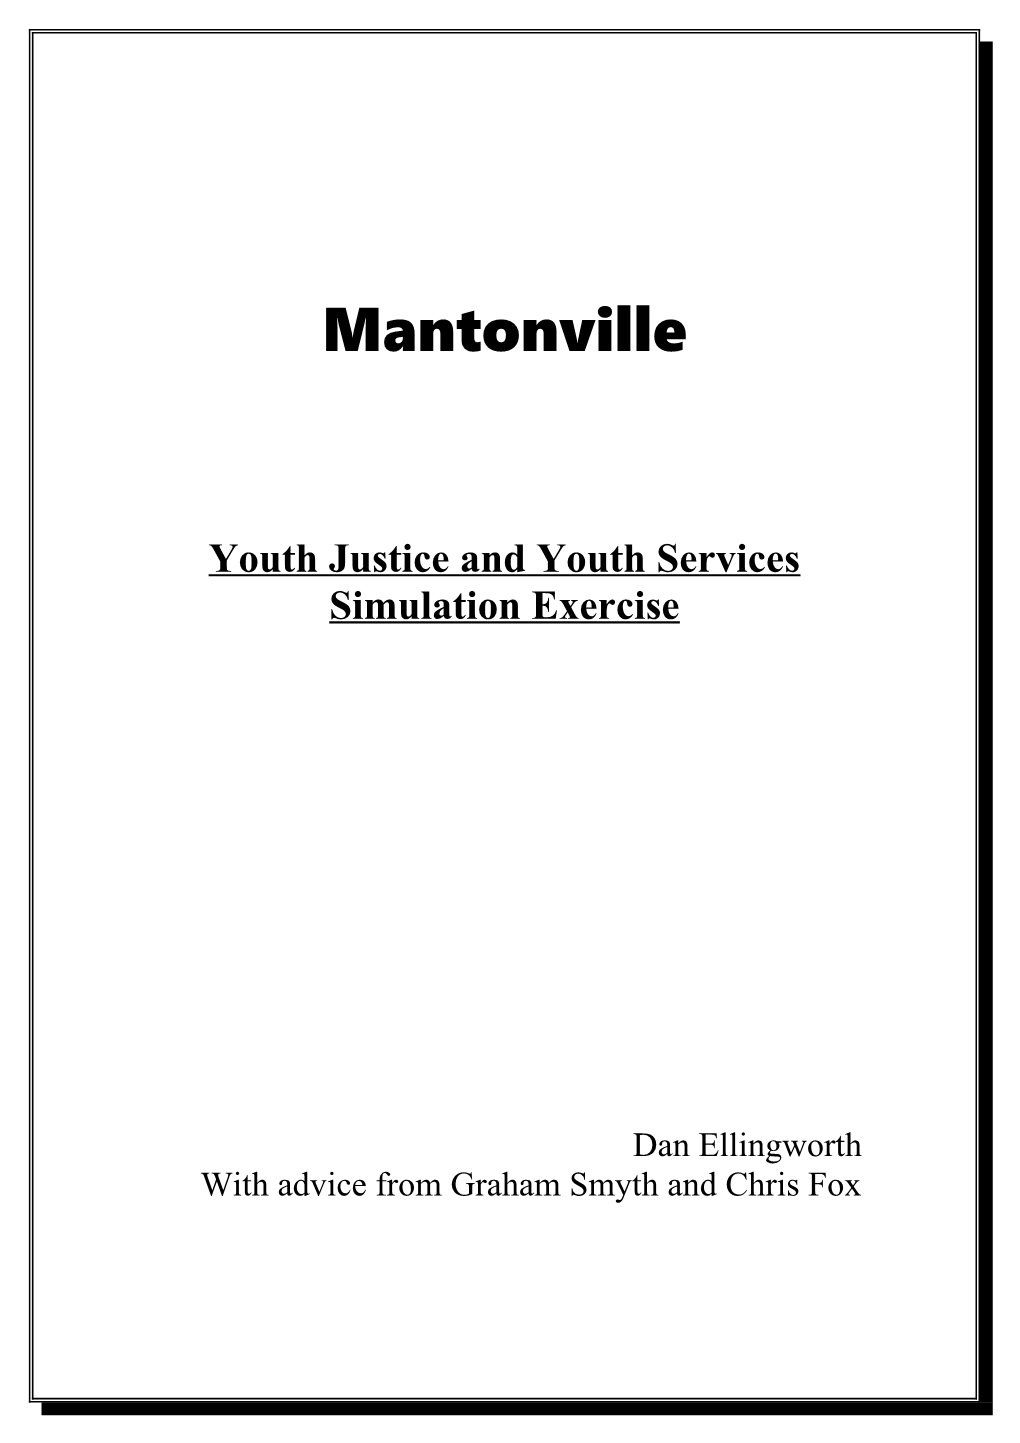 Youth Justice and Youth Services